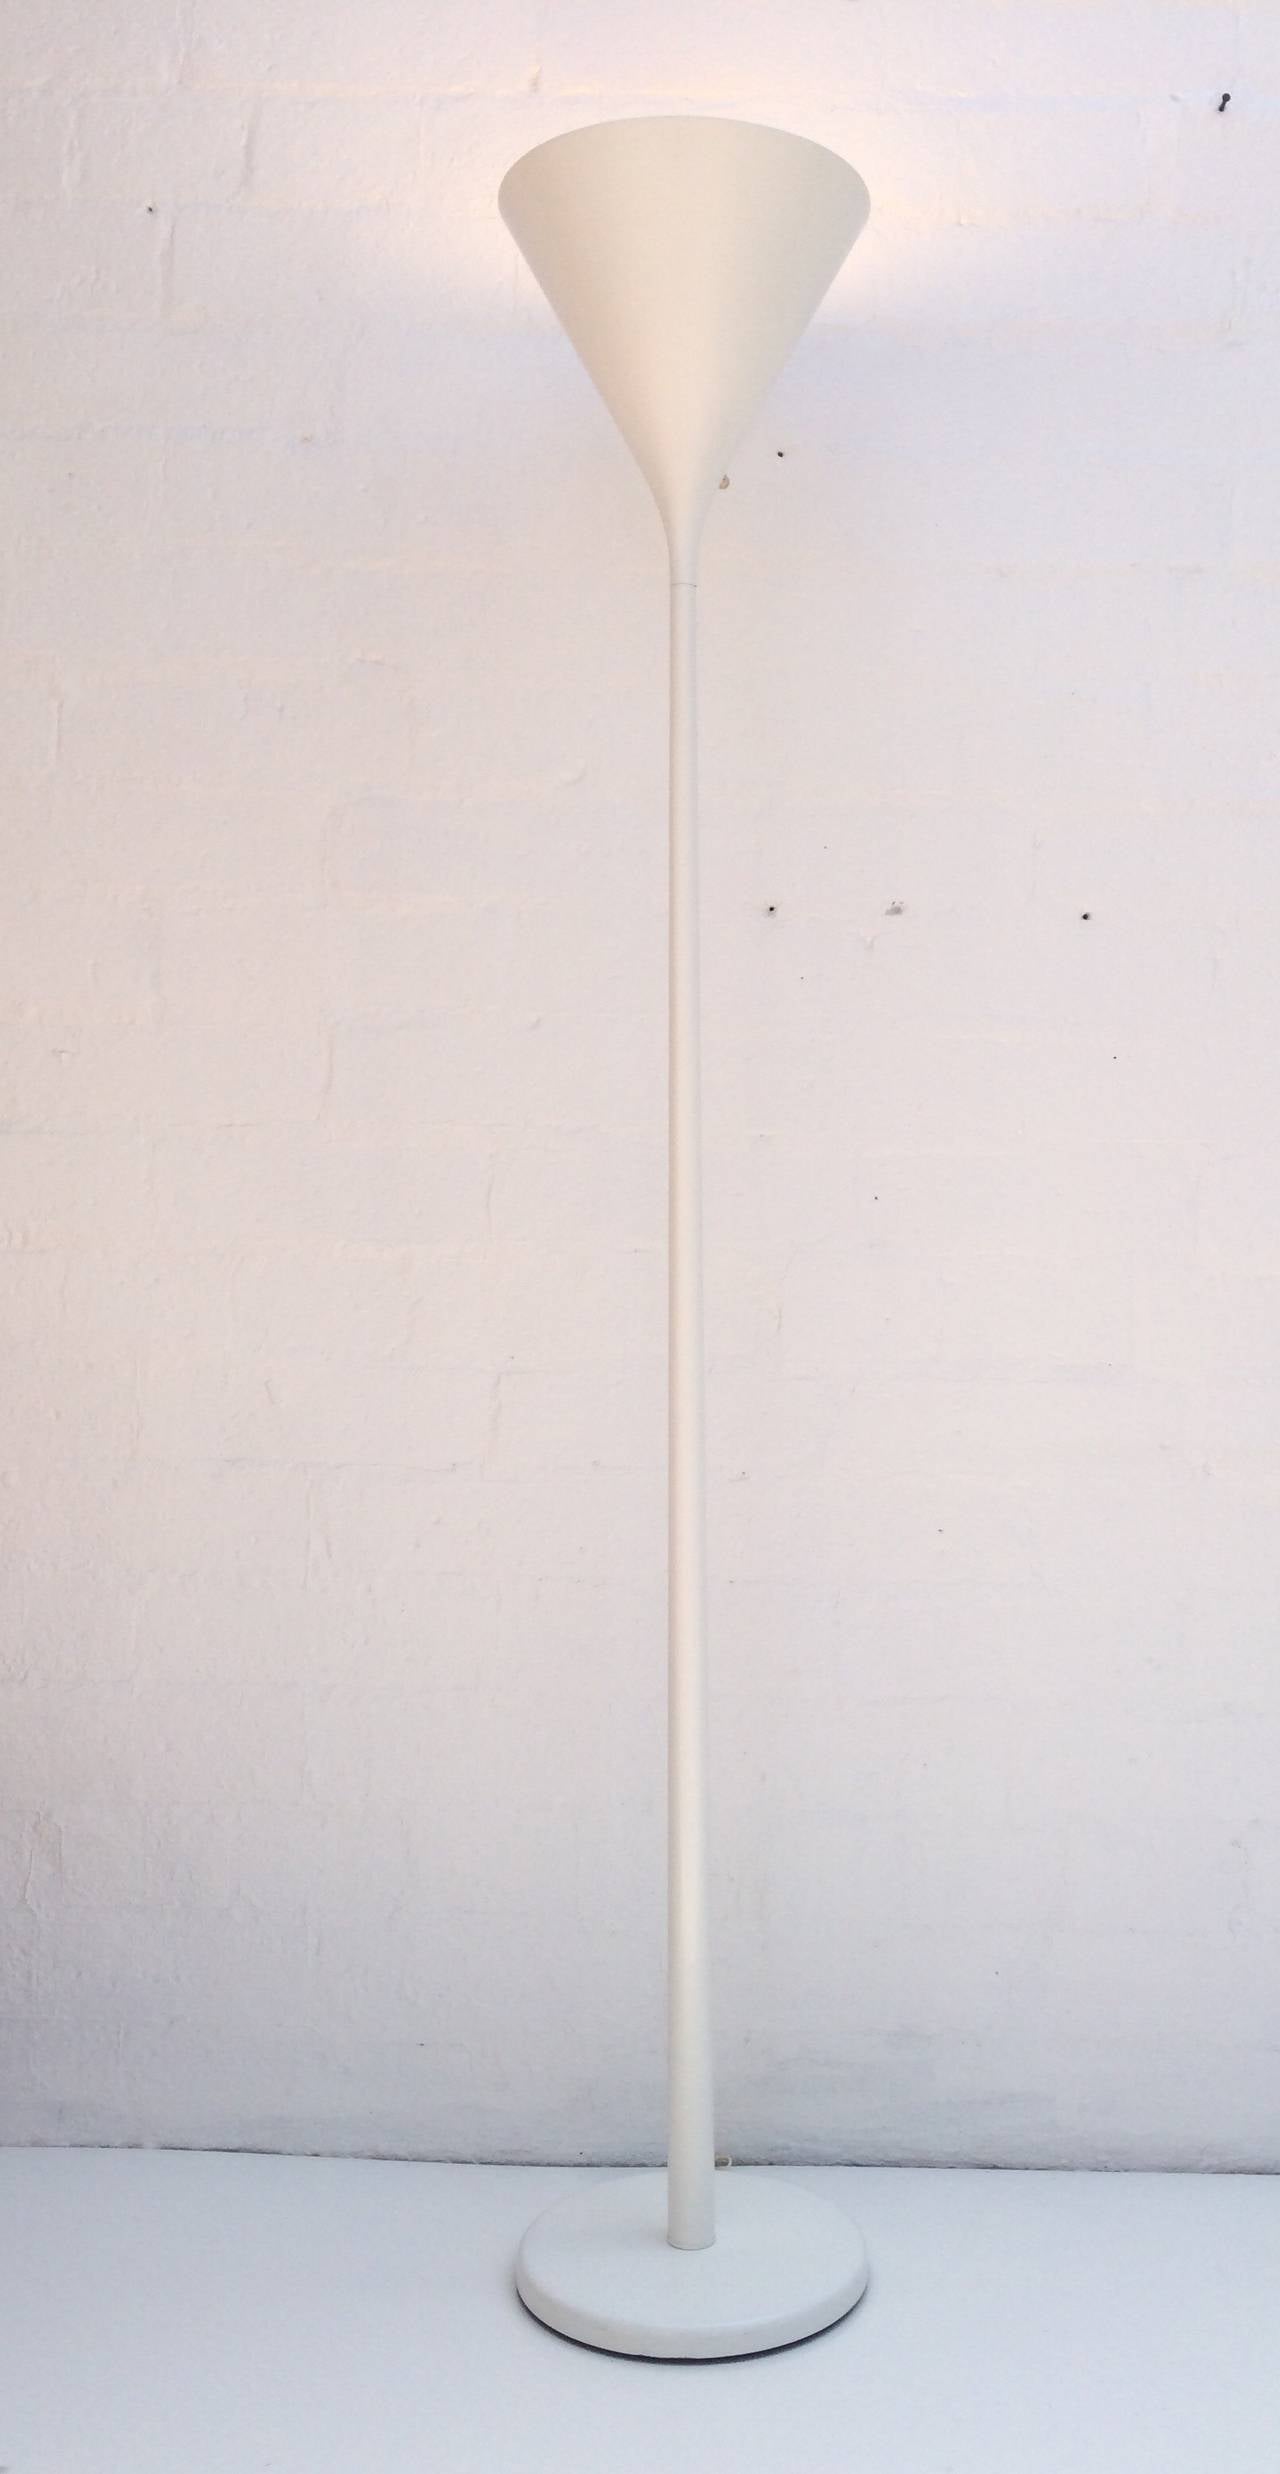 This simple elegant white powder-coated torchiere lamp by Nessen Studio is newly rewired.
circa 1970s.